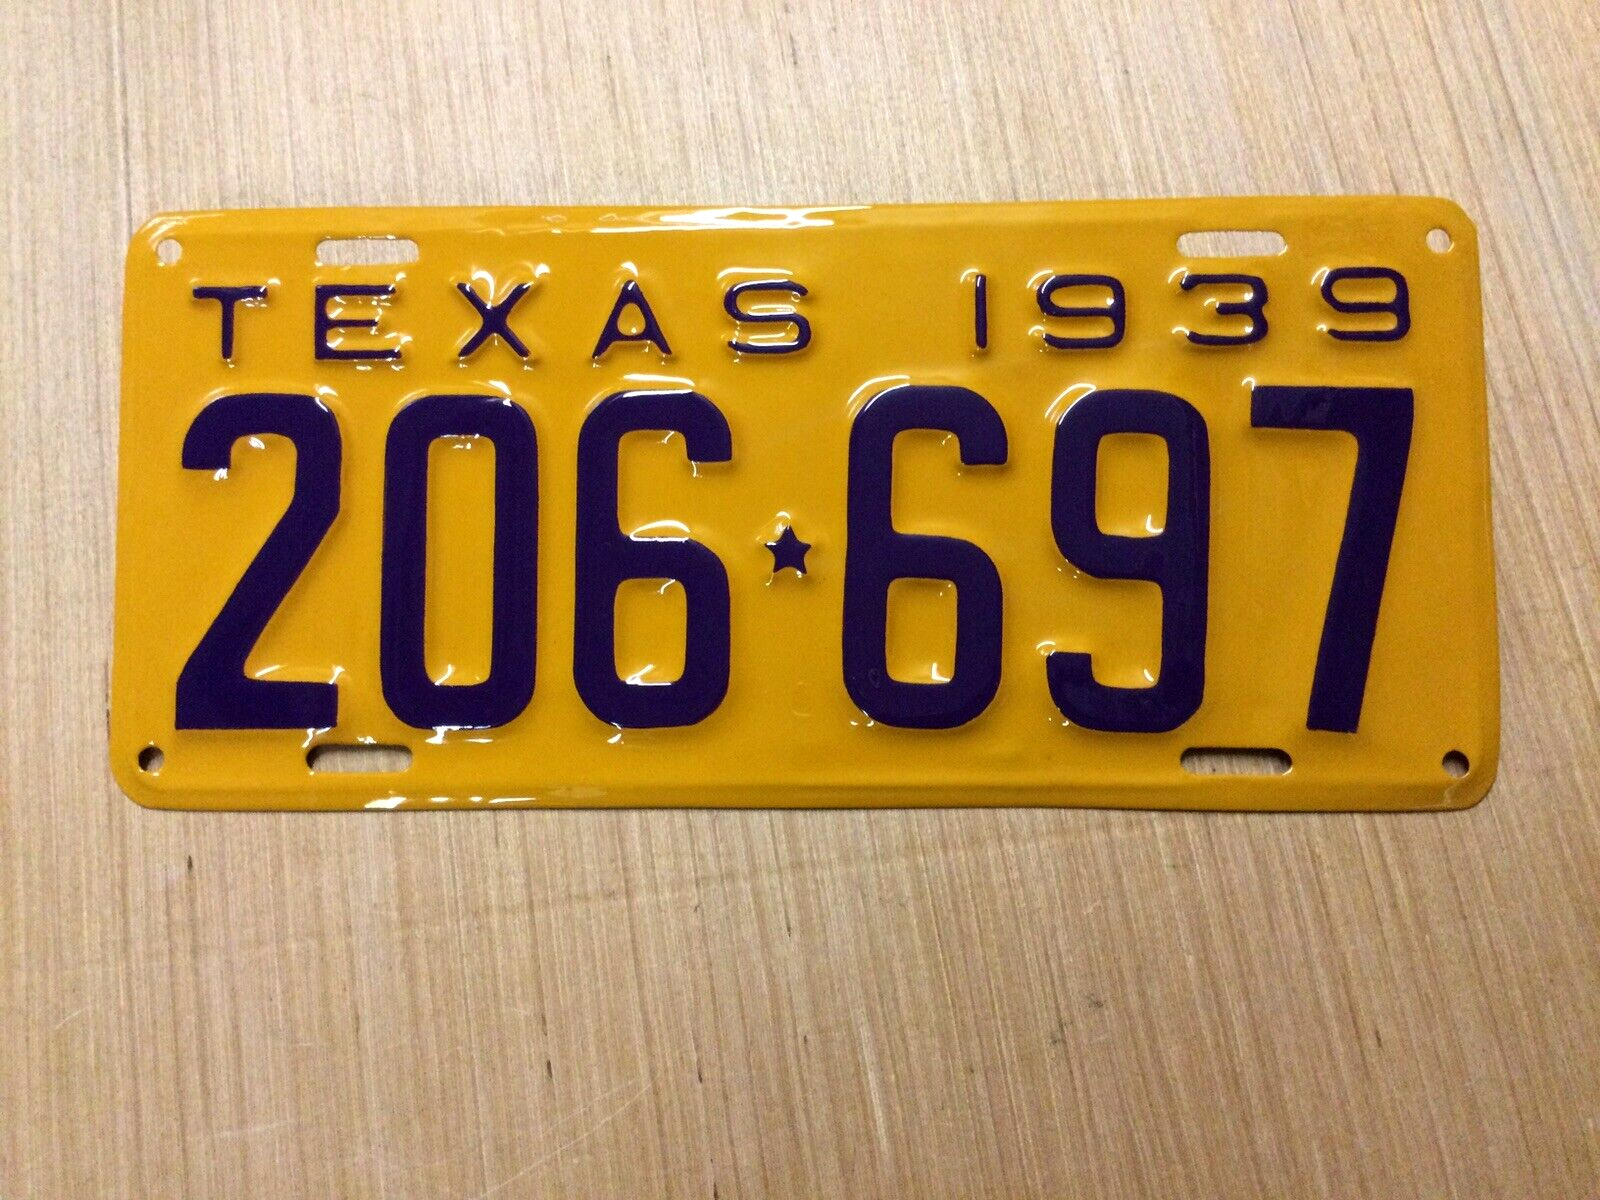 VINTAGE 1939 TEXAS TX. LICENSE PLATE VERY NICELY RESTORED HIGH QUALITY 206 697